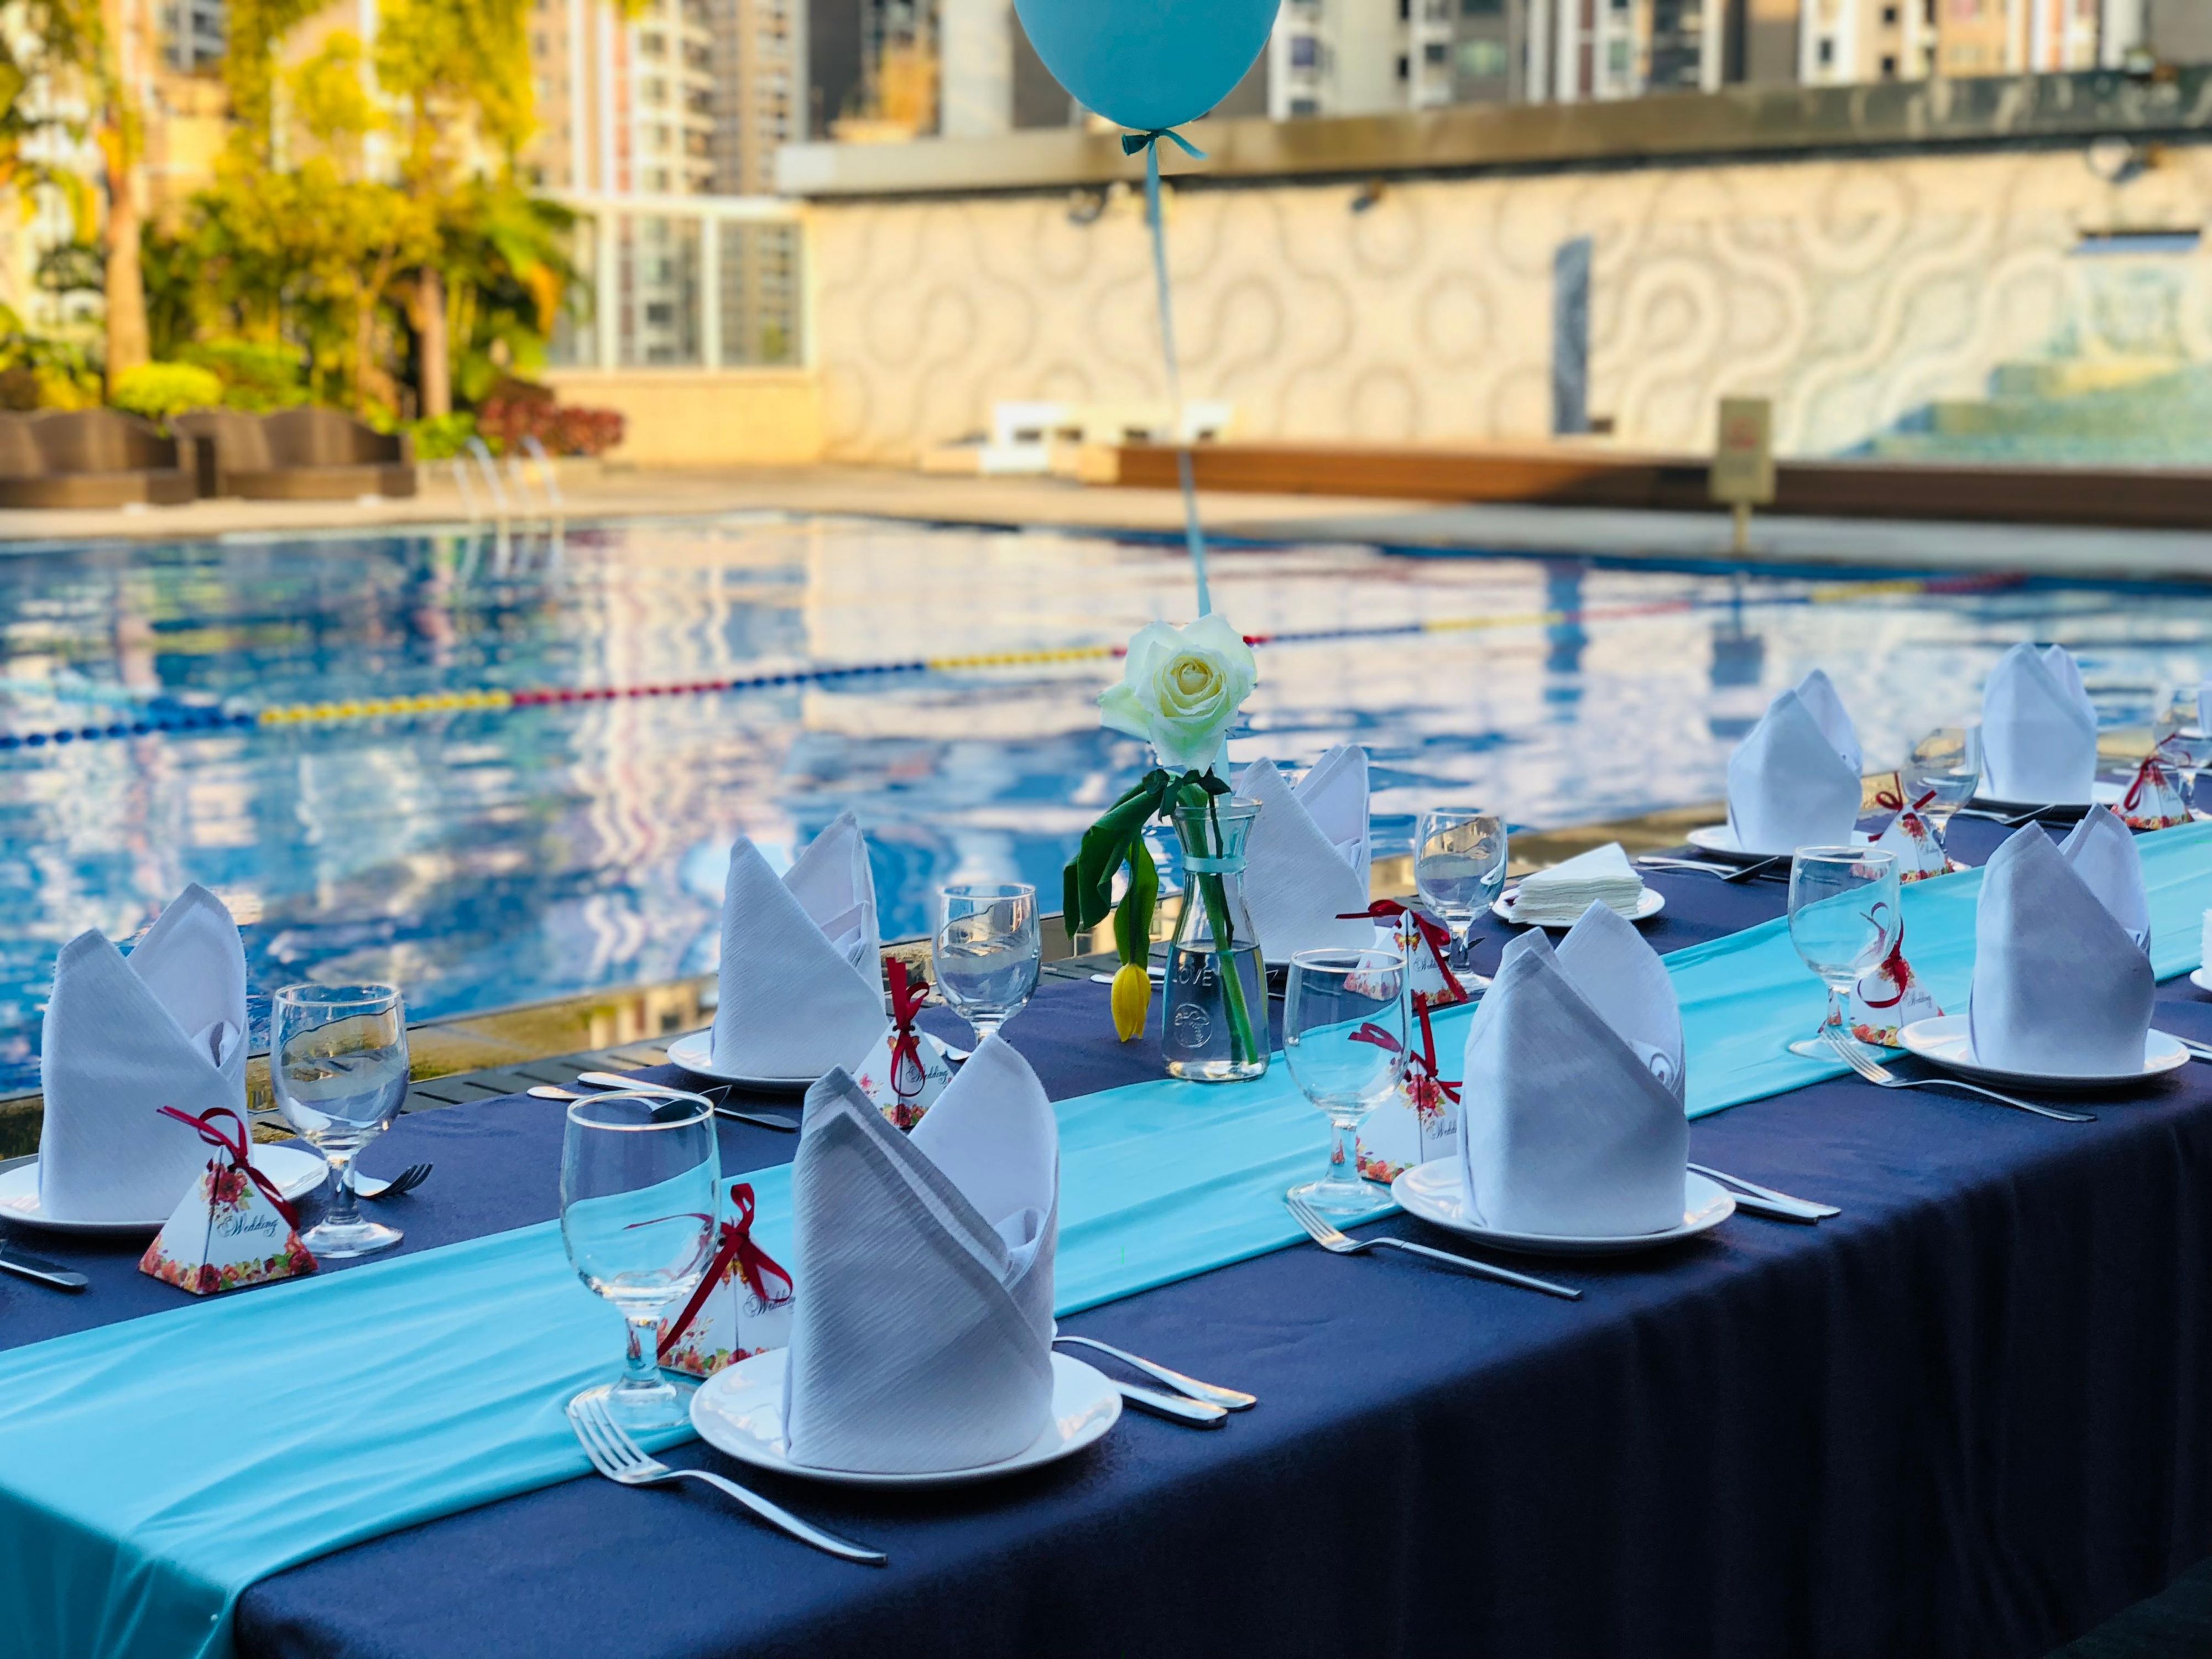 A poolside banquet is the way to flaunt your character. Adorned by style and charisma, our poolside bar on the podium garden makes the best aisle for any ceremony and the hottest spot for pre-function cocktail party. It does not take lavishness to ignite the spark that illuminates every corner and flood every guest with bliss.